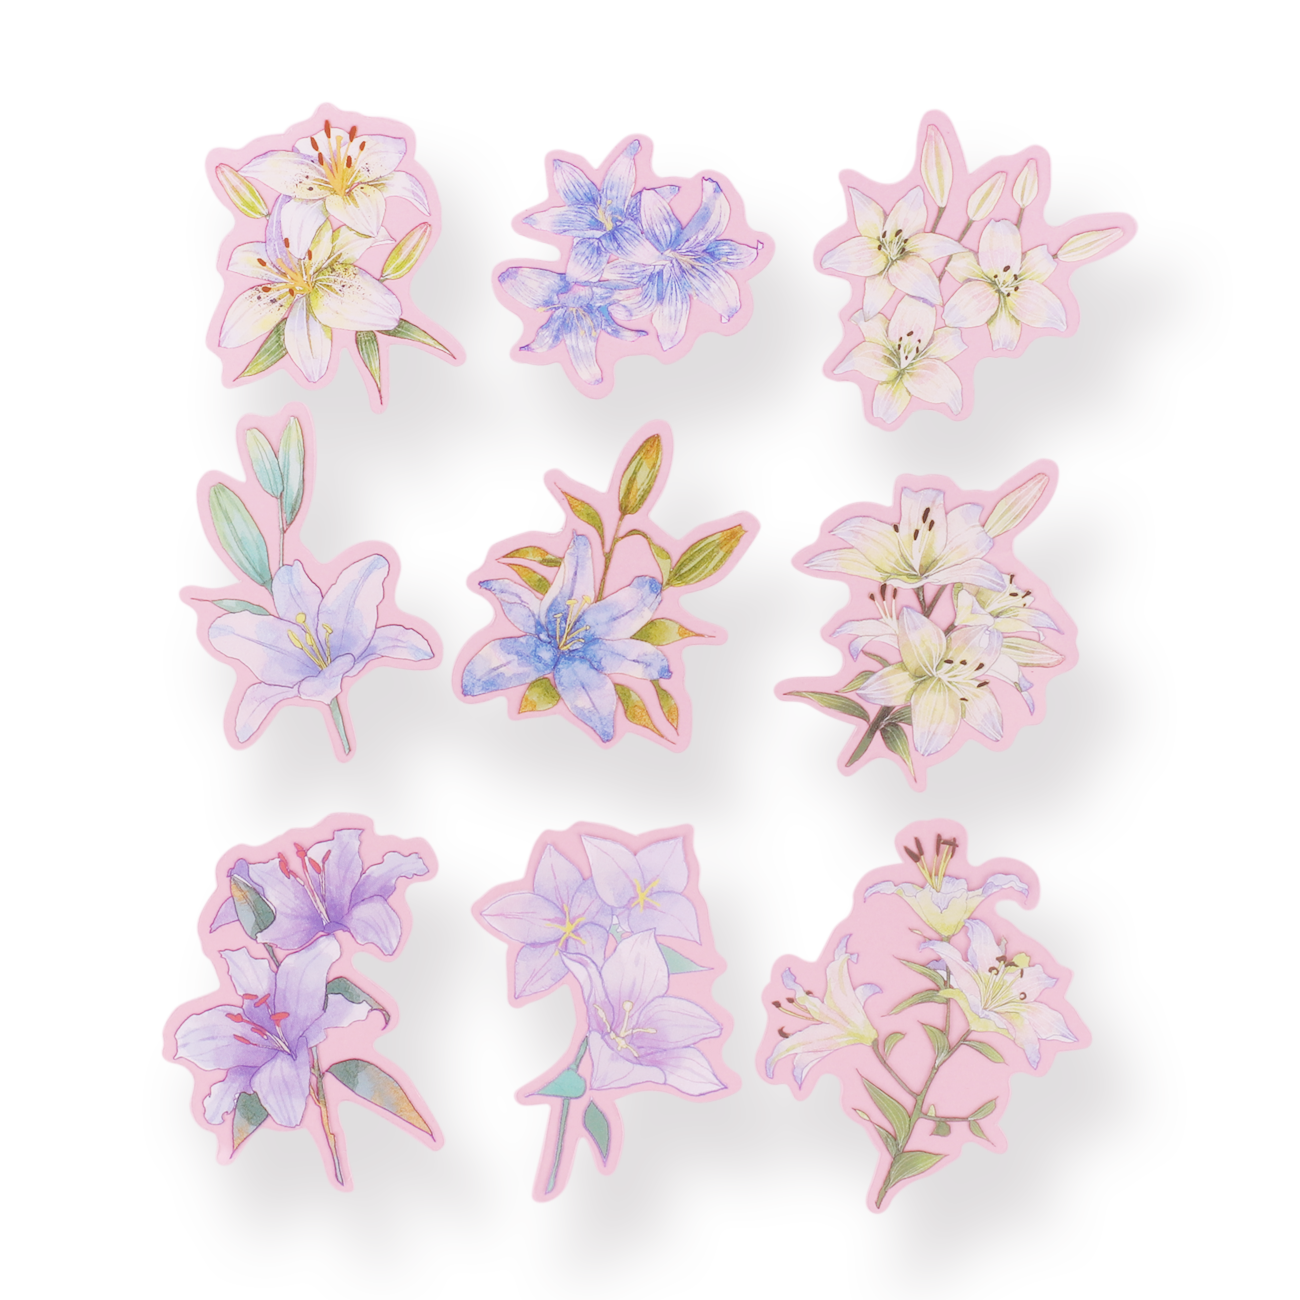 Holographic Colorful Small Butterfly Rose Deco Stickers, Lily Flower Kpop  Toploader Deco Sticker Sheet, Ginkgo Leaf Stickers, Daisy Stickers 